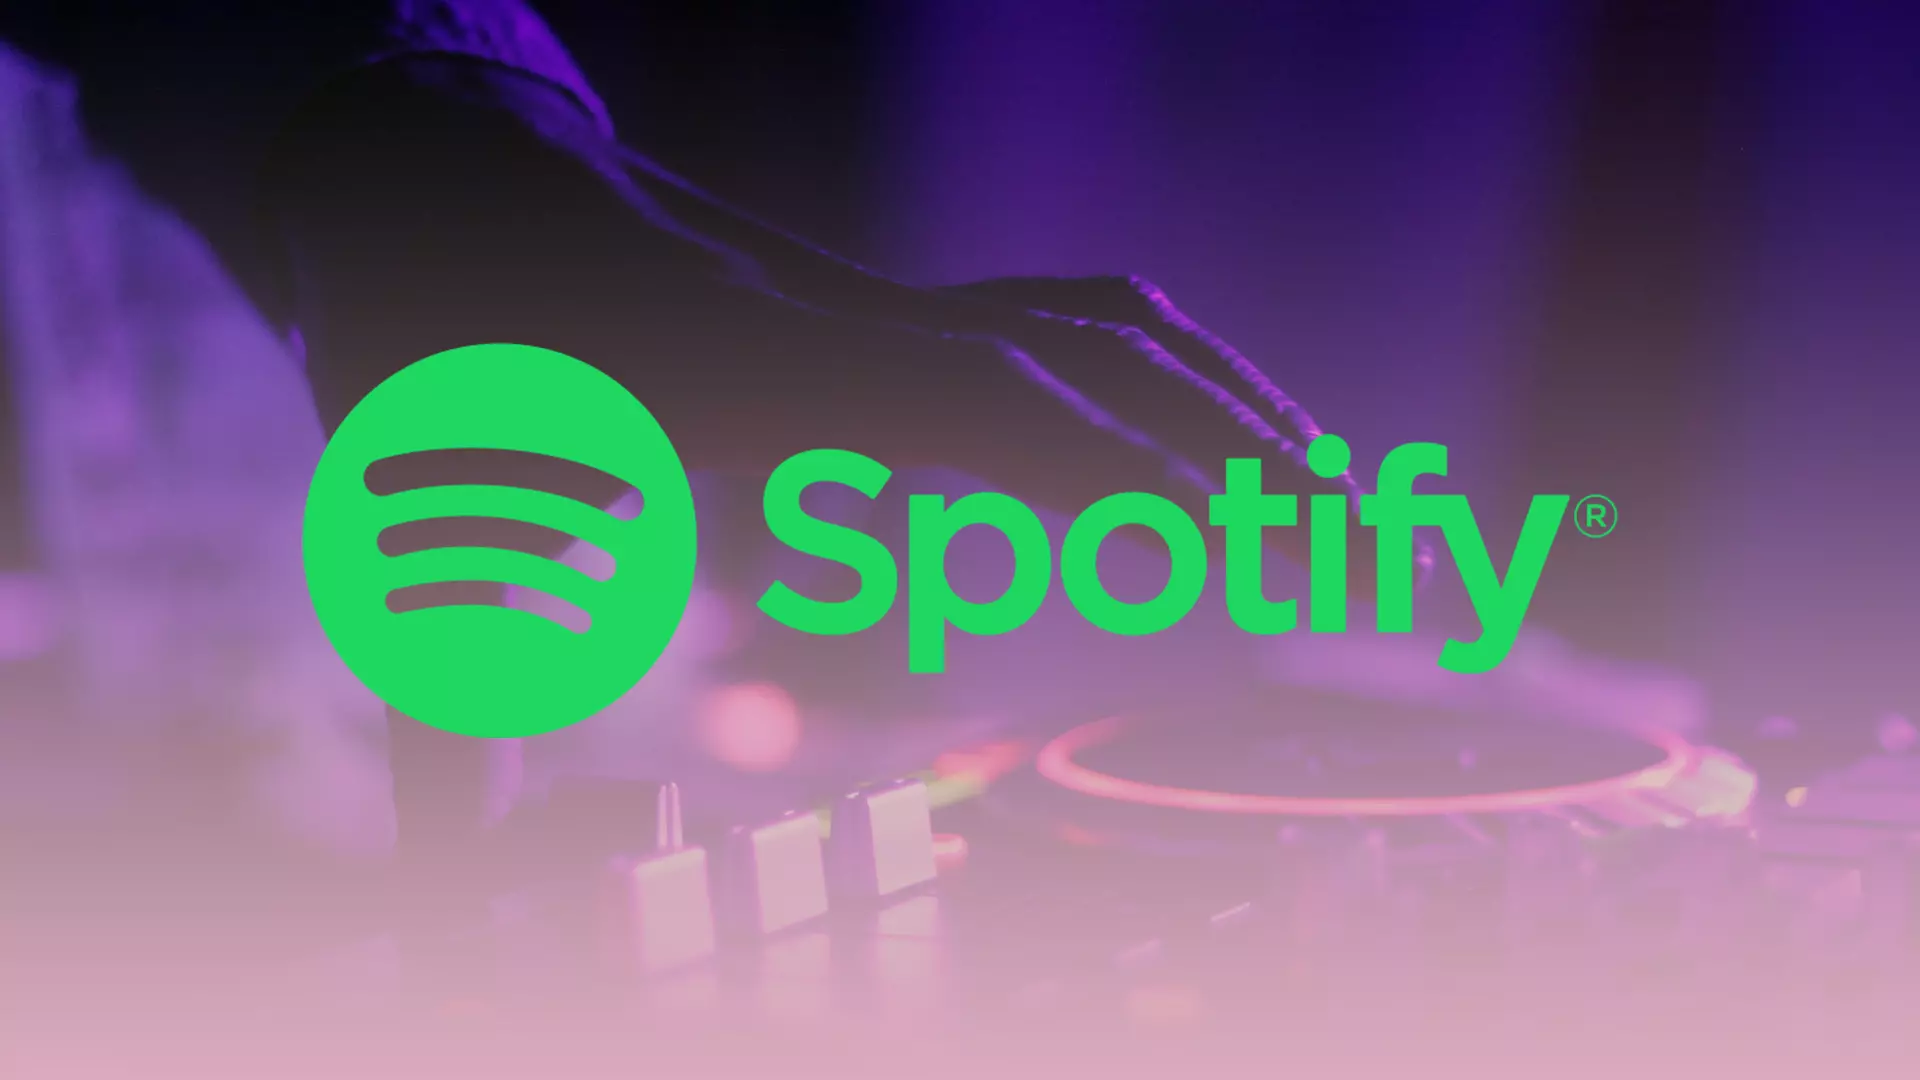 How to clear Spotify cache